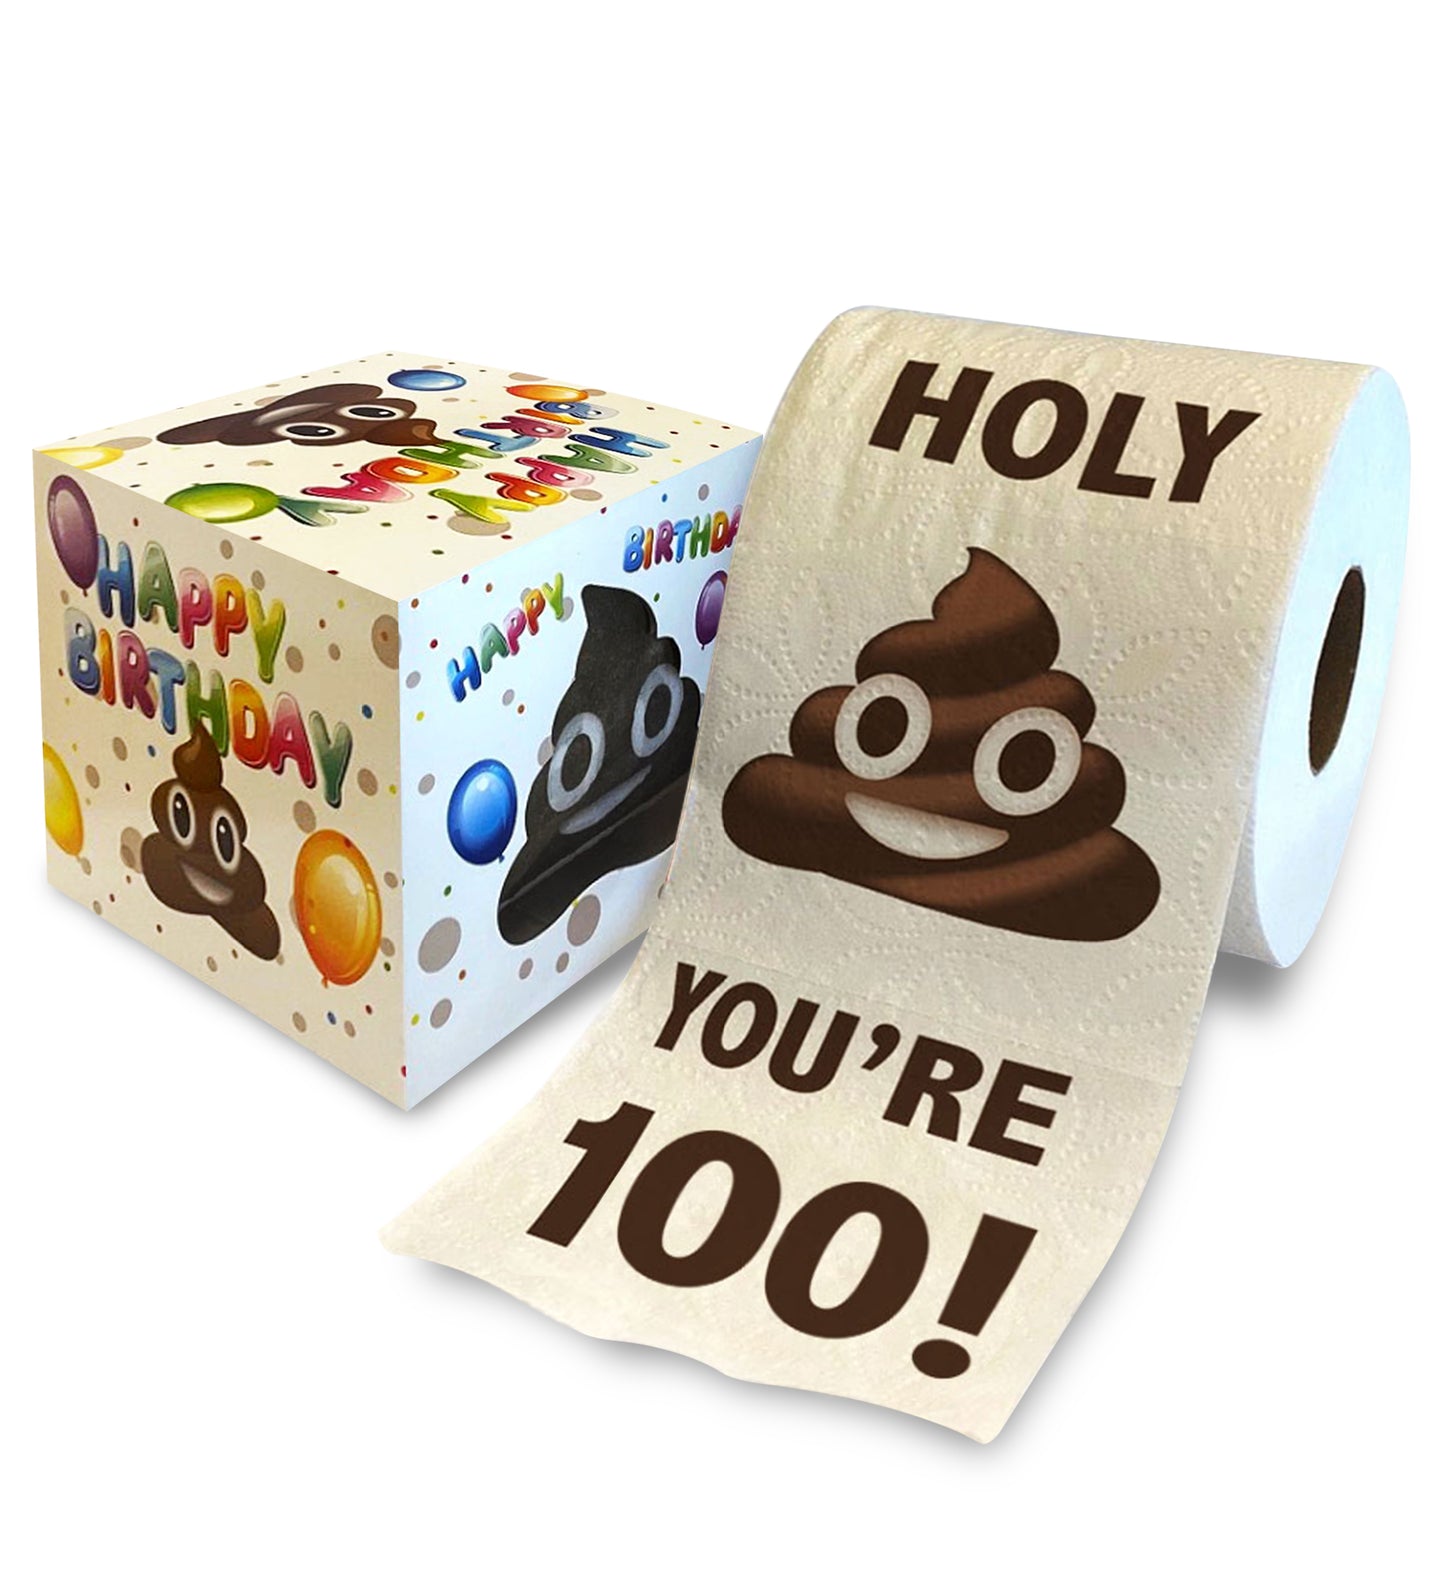 Printed TP Holy Poop You're 100 Printed Toilet Paper Funny Gag Gift, 500 Sheets